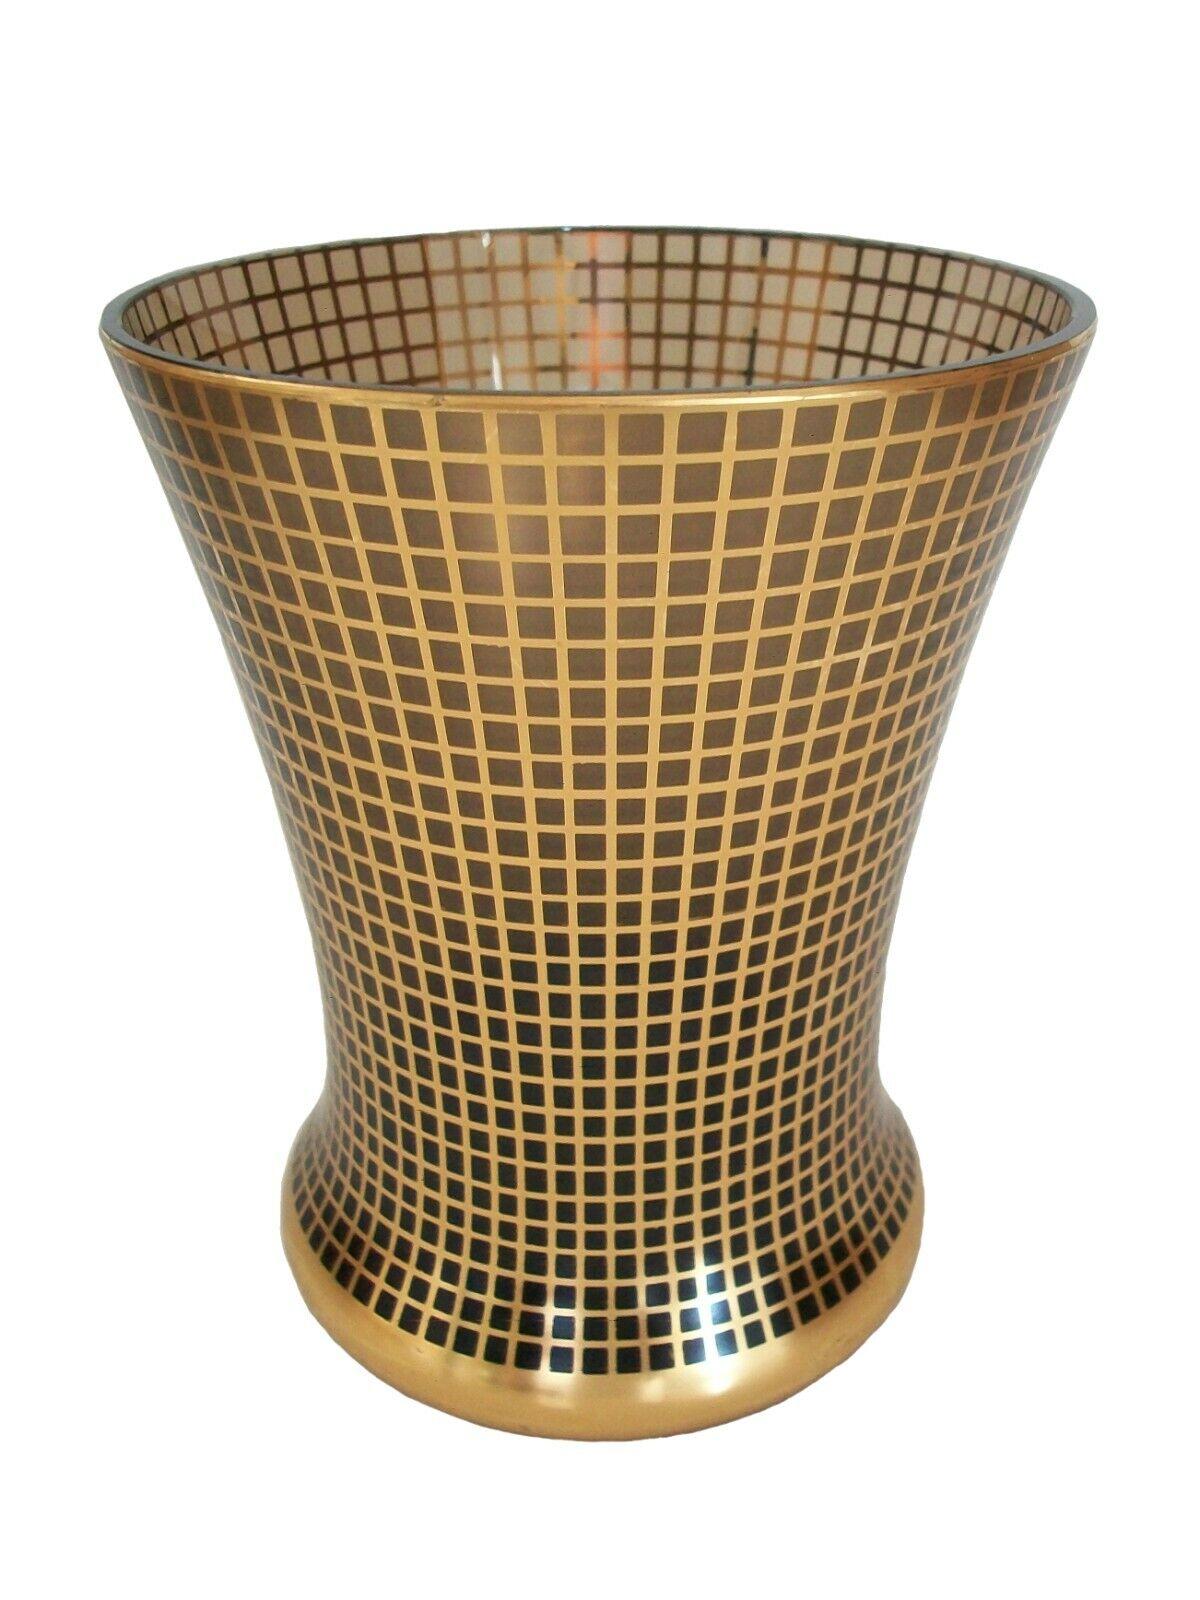 Brüder Podbira - Antique Art Deco topaz glass vase with gilded grid decoration - the design heavily influenced by the work of Josef Hoffmann and the Wiener Werkstätte - striking design with hand applied gilding - rare beaker form with wheel polished